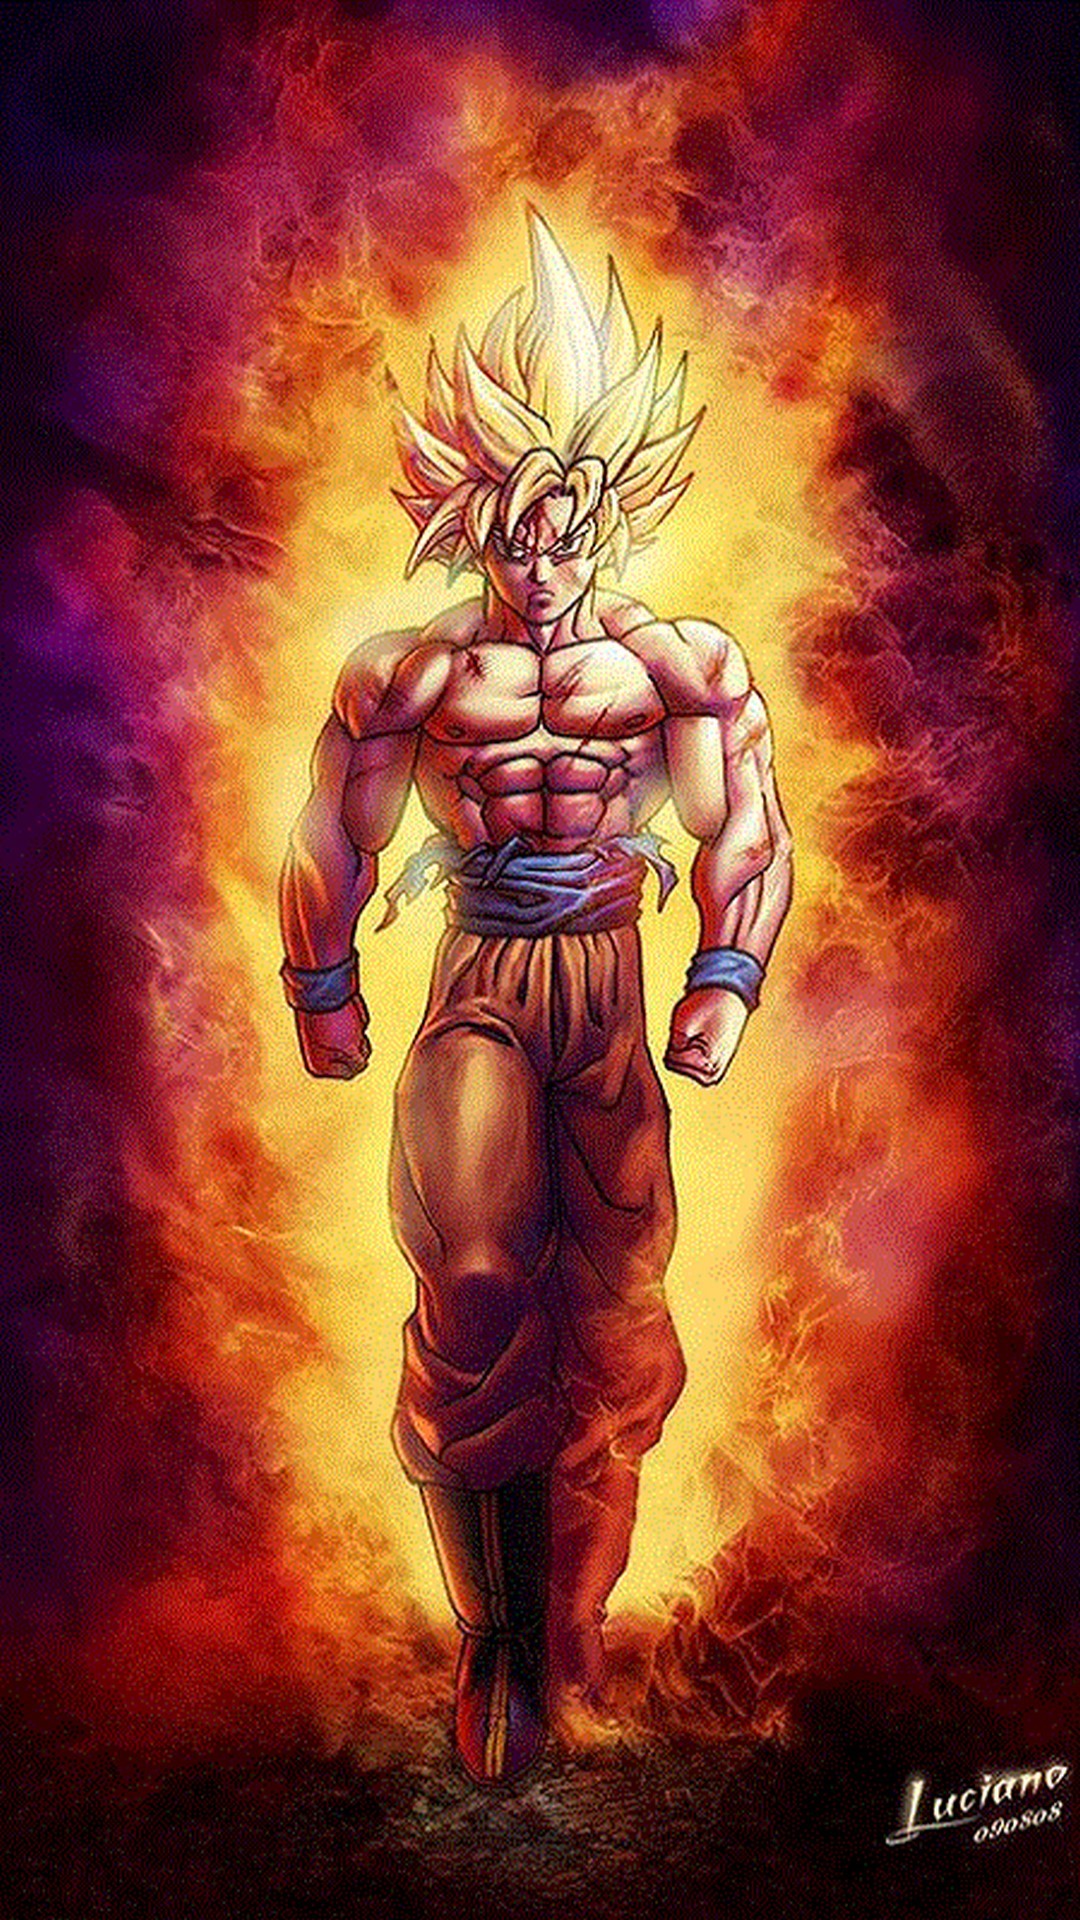 Best Goku Super Saiyan Wallpaper iPhone with image resolution 1080x1920 pixel. You can make this wallpaper for your iPhone 5, 6, 7, 8, X backgrounds, Mobile Screensaver, or iPad Lock Screen